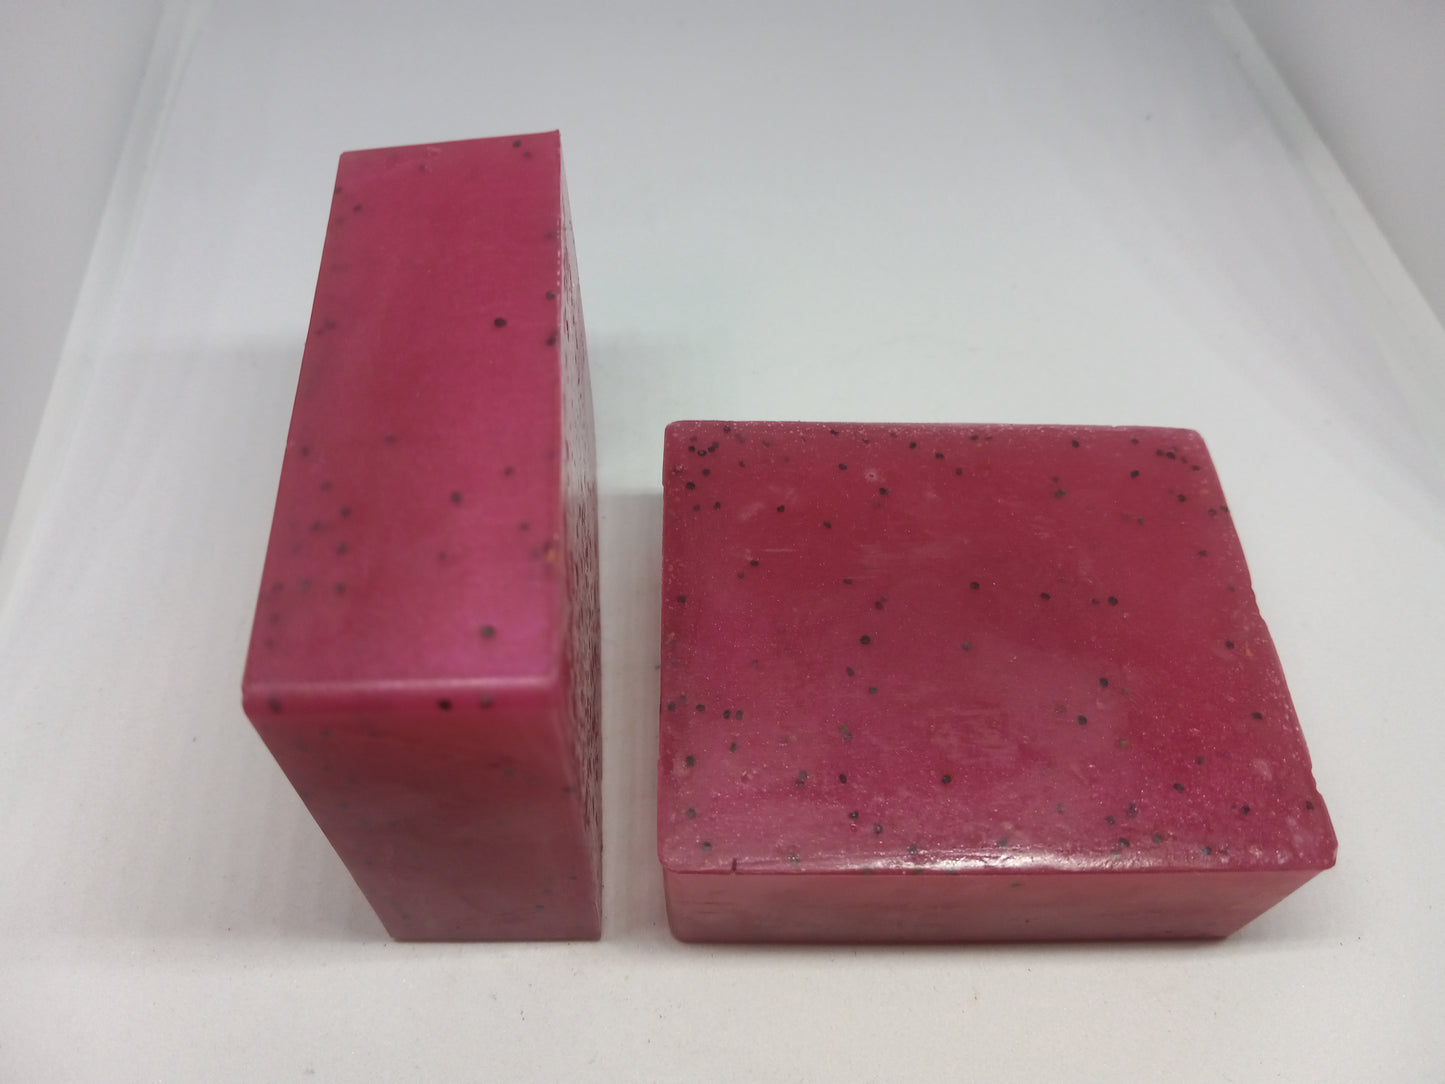 Lychee Red Tea - Hand Poured Exfoliating Olive Oil / Hemp Seed Oil Soap